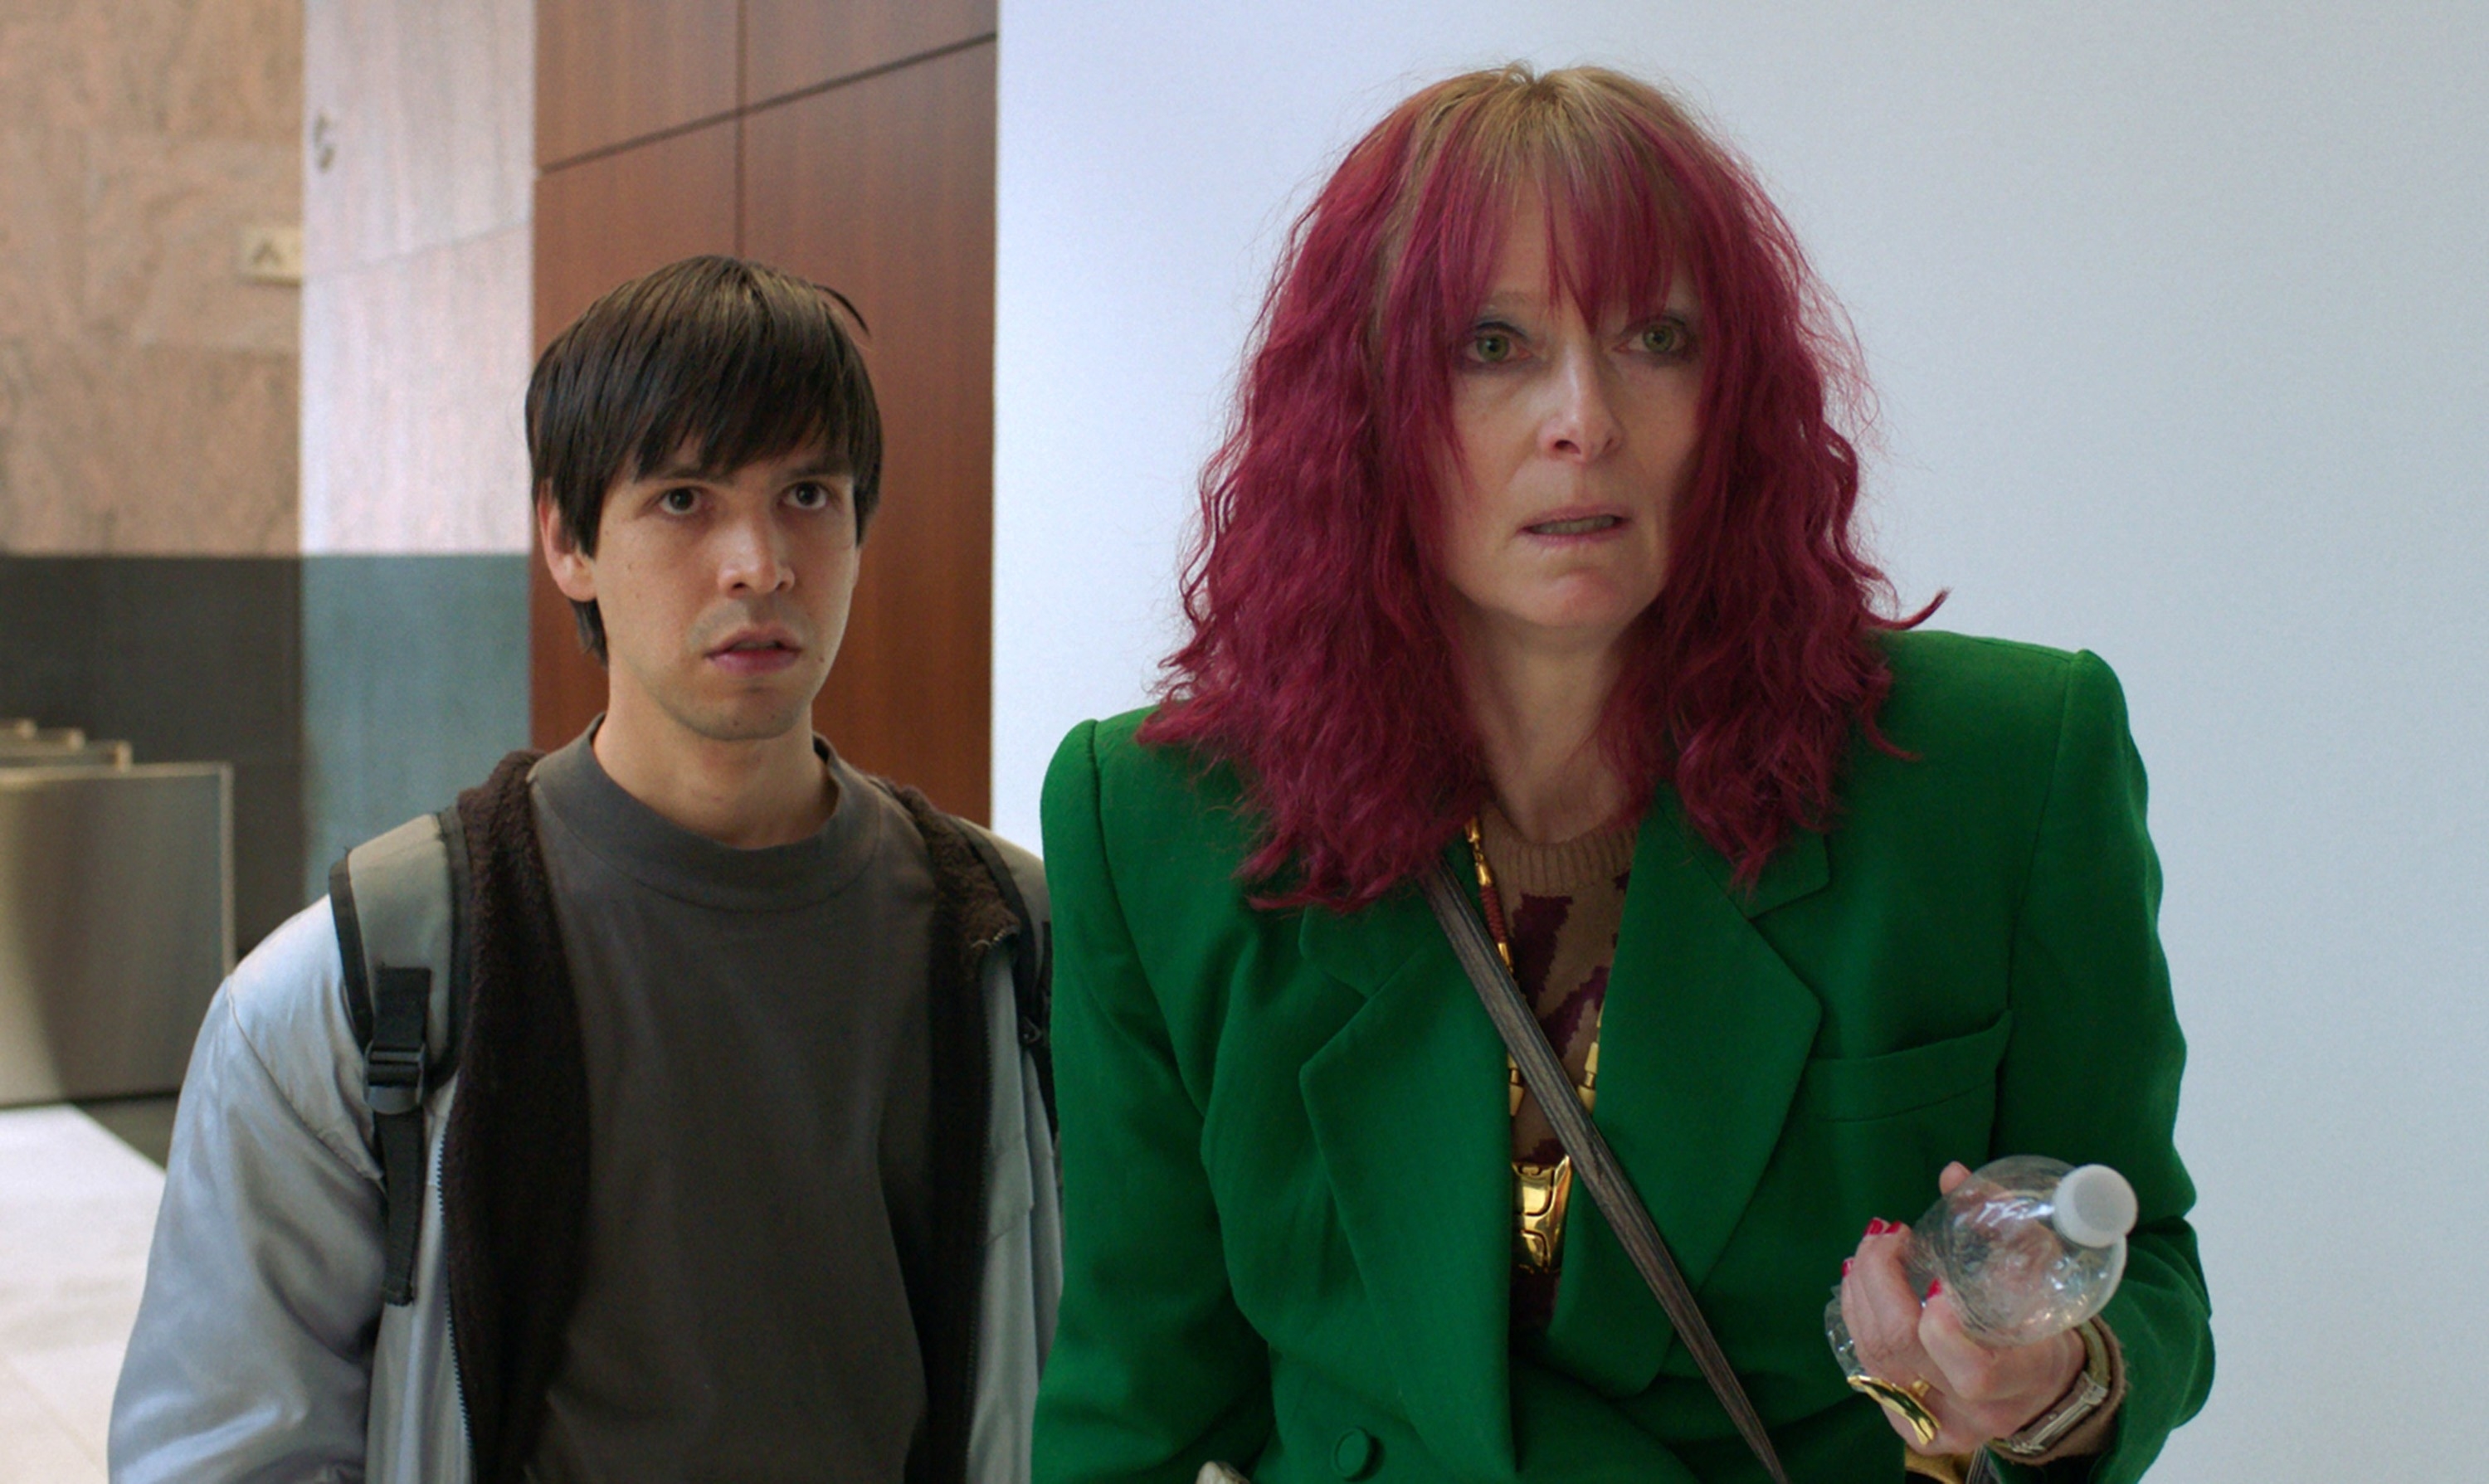 Two characters in a scene, woman in green blazer with pink hair, man in brown shirt with backpack